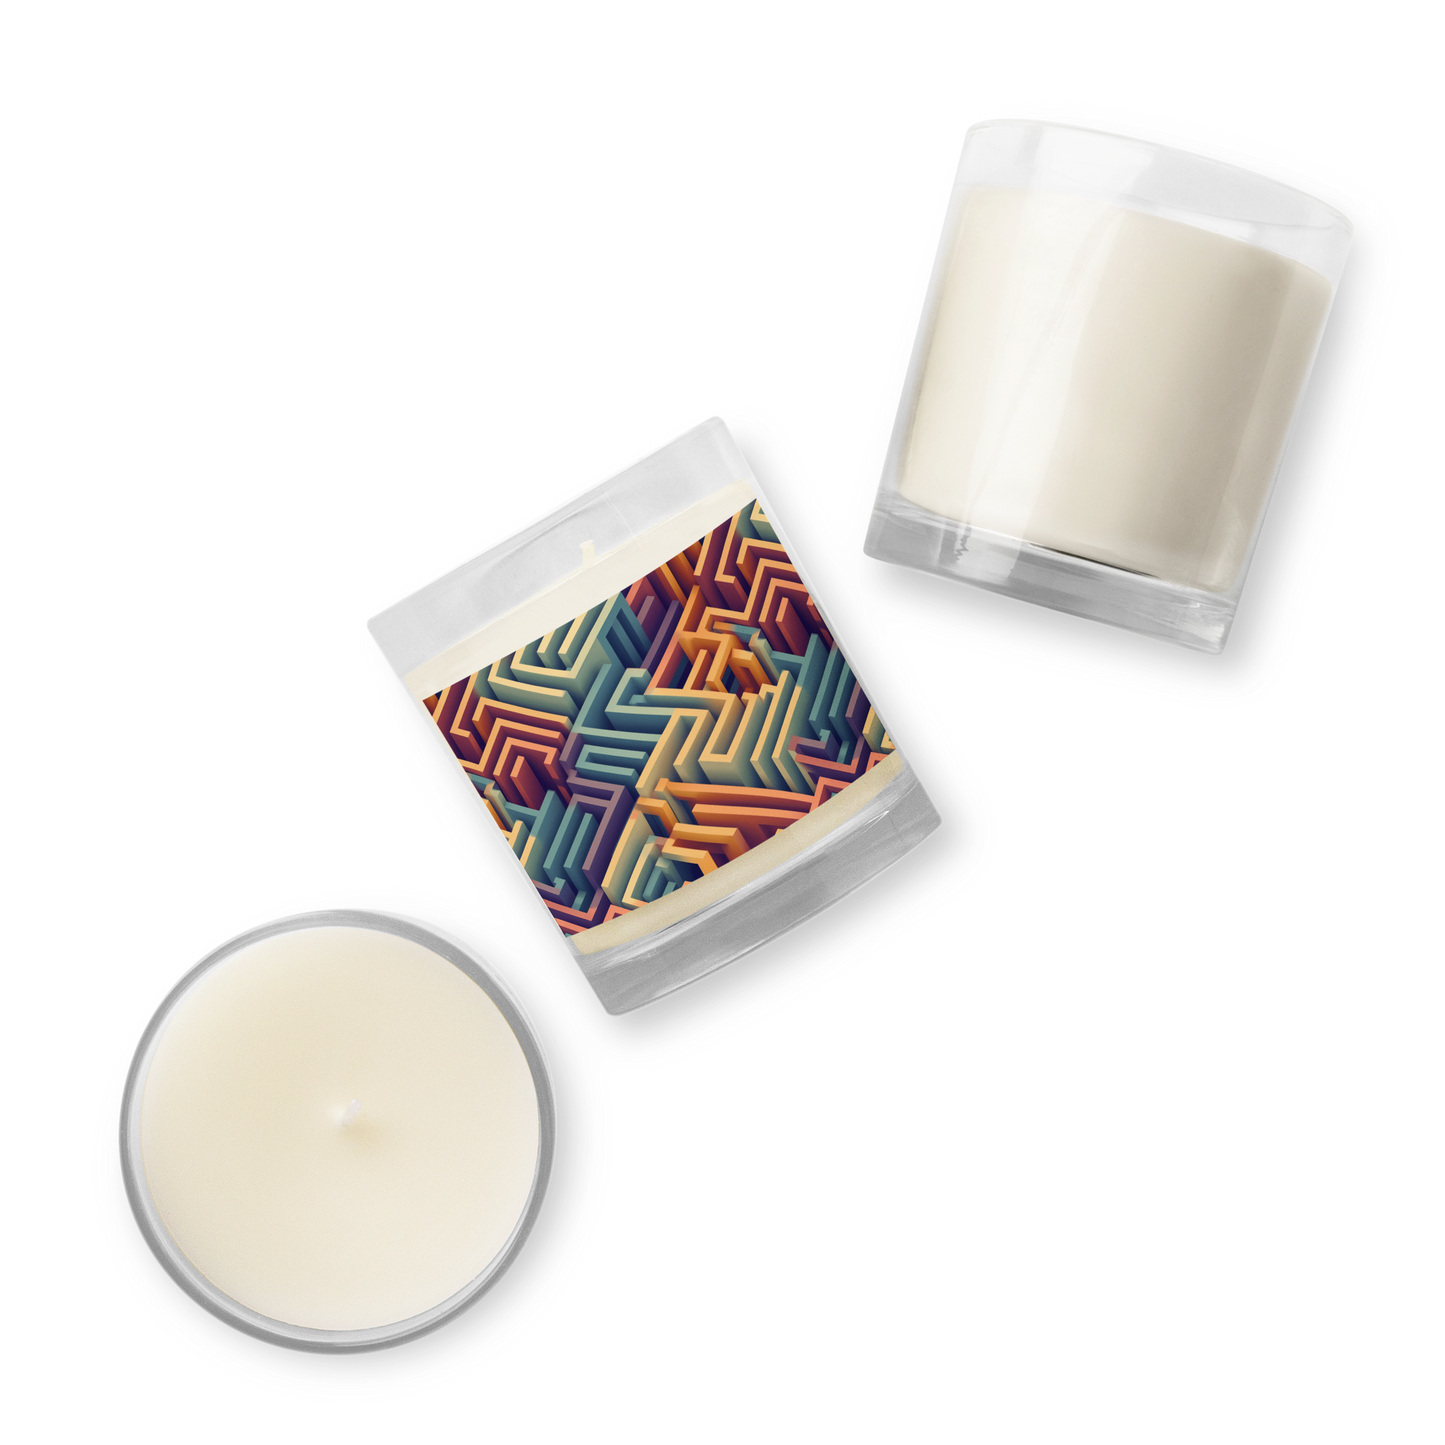 3D Maze Illusion | 3D Patterns | Glass Jar Soy Wax Candle - #3